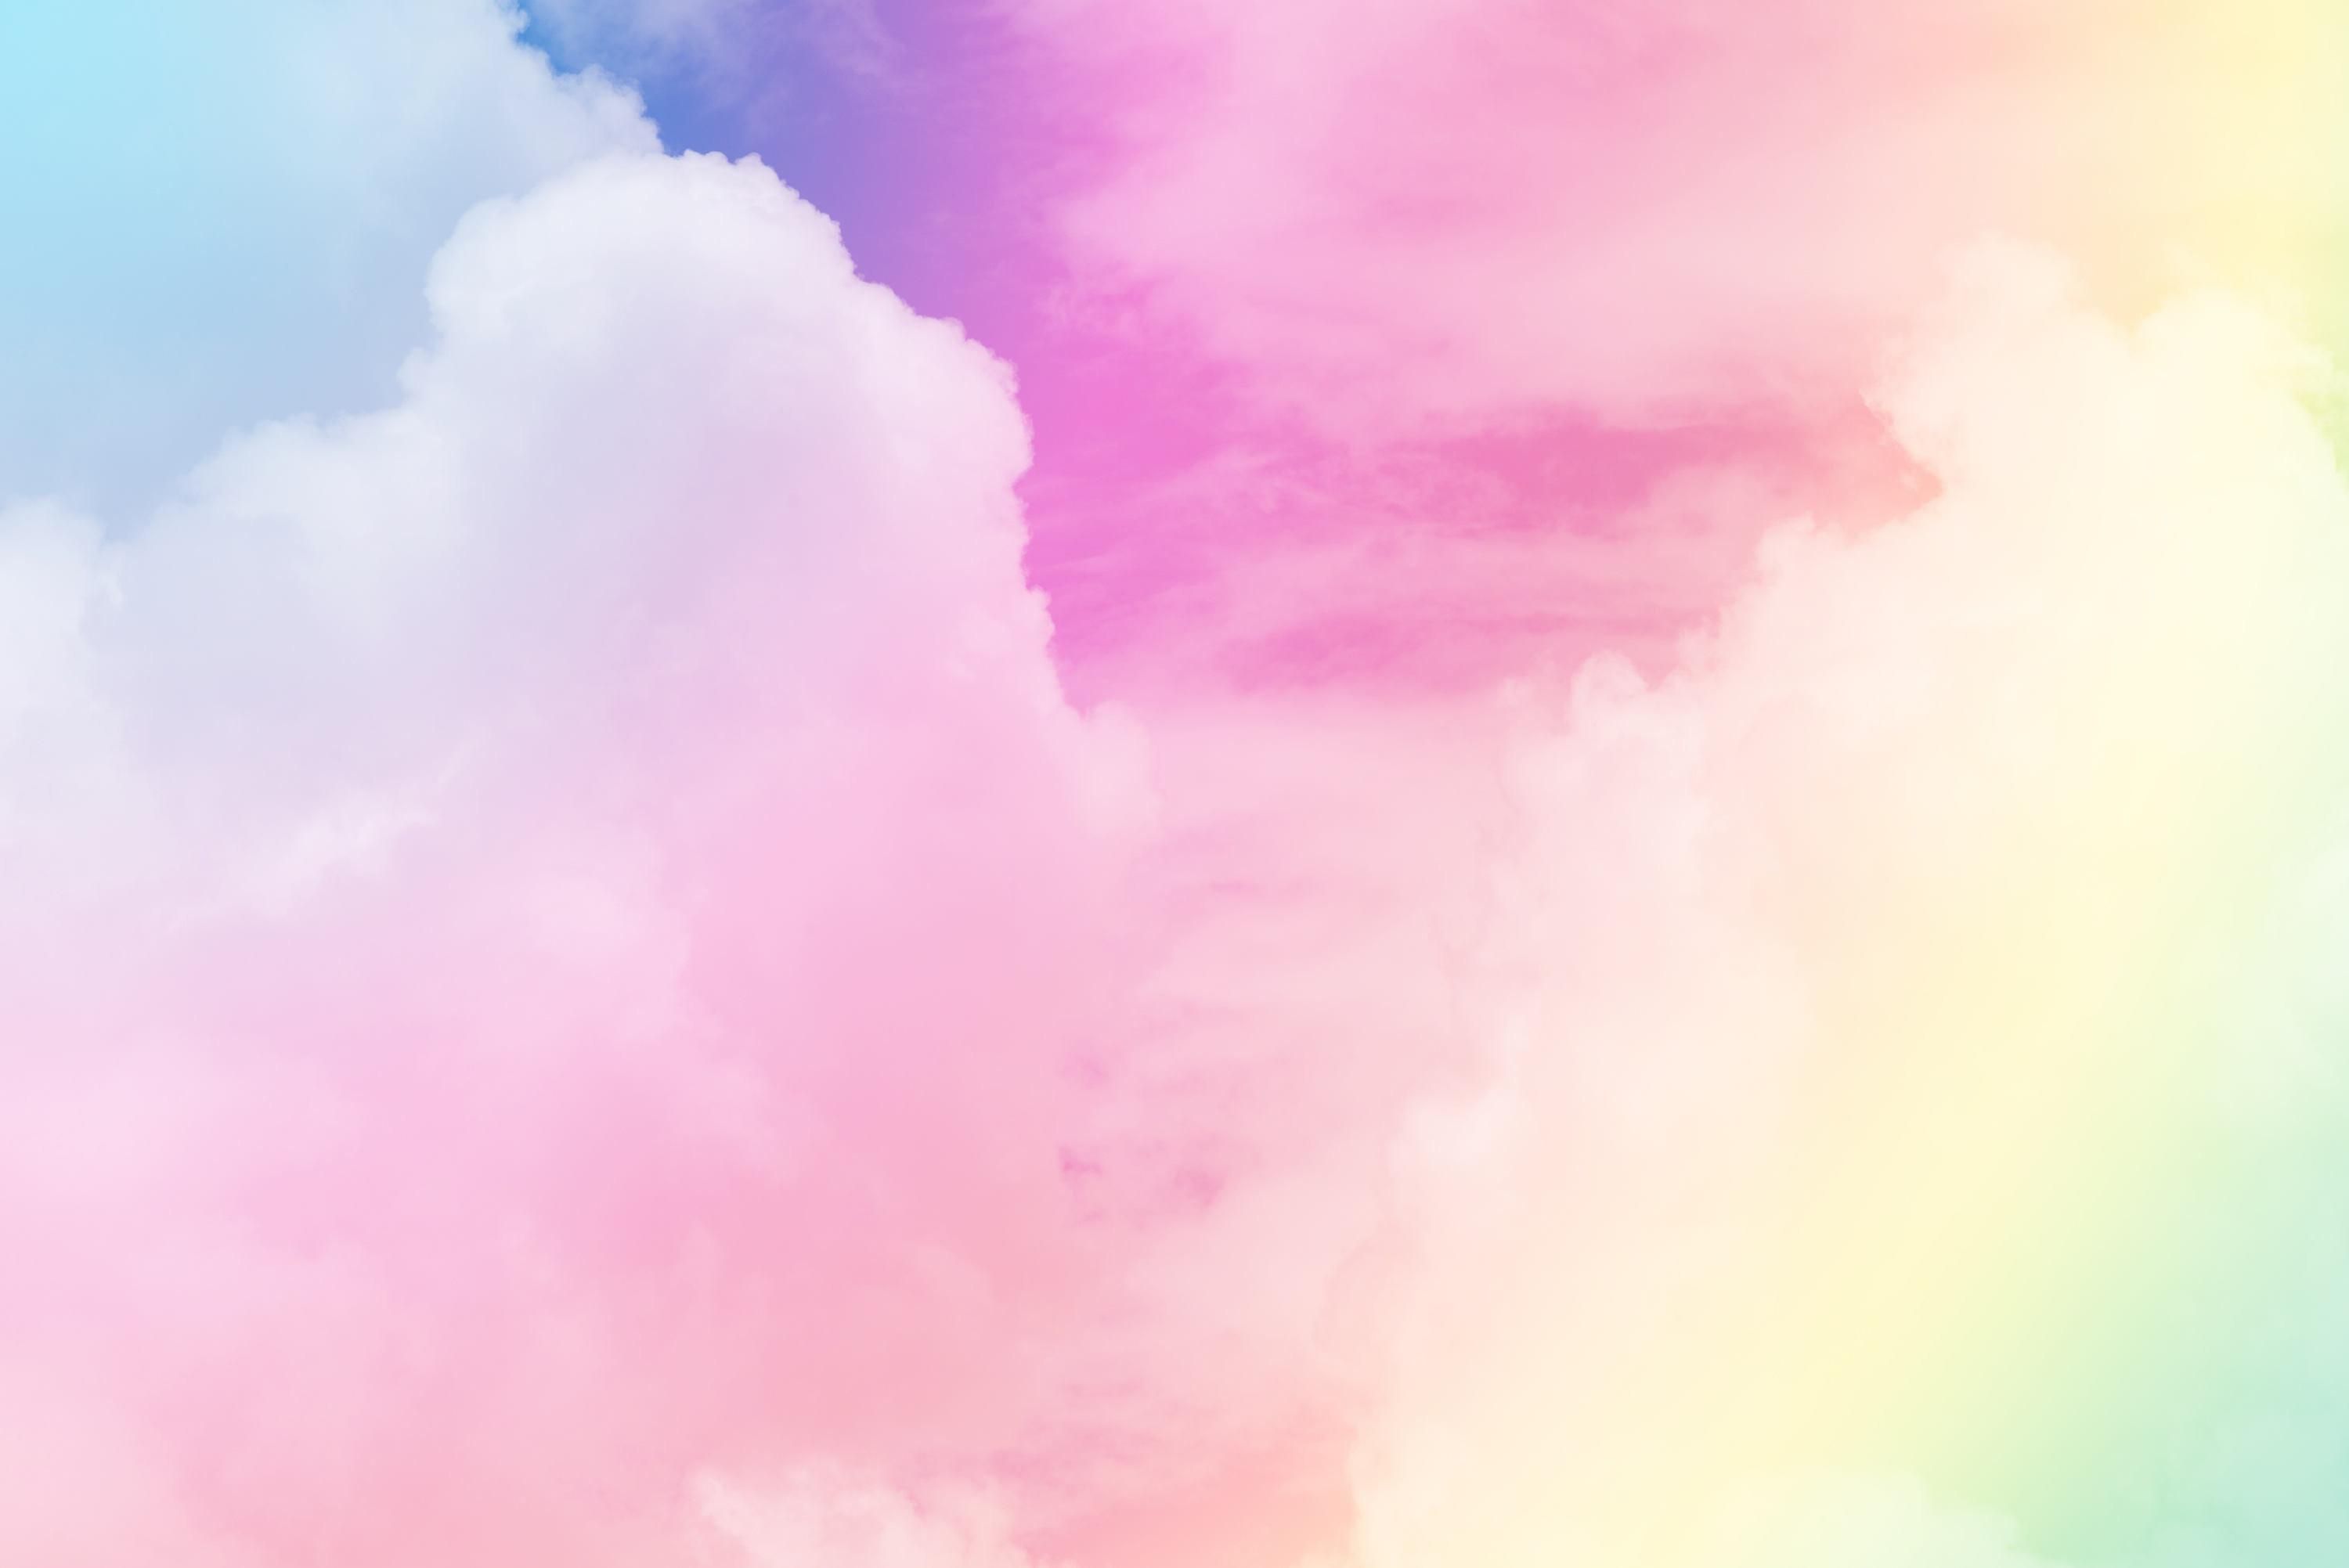 A sky with a pastel rainbow gradient - Pastel rainbow